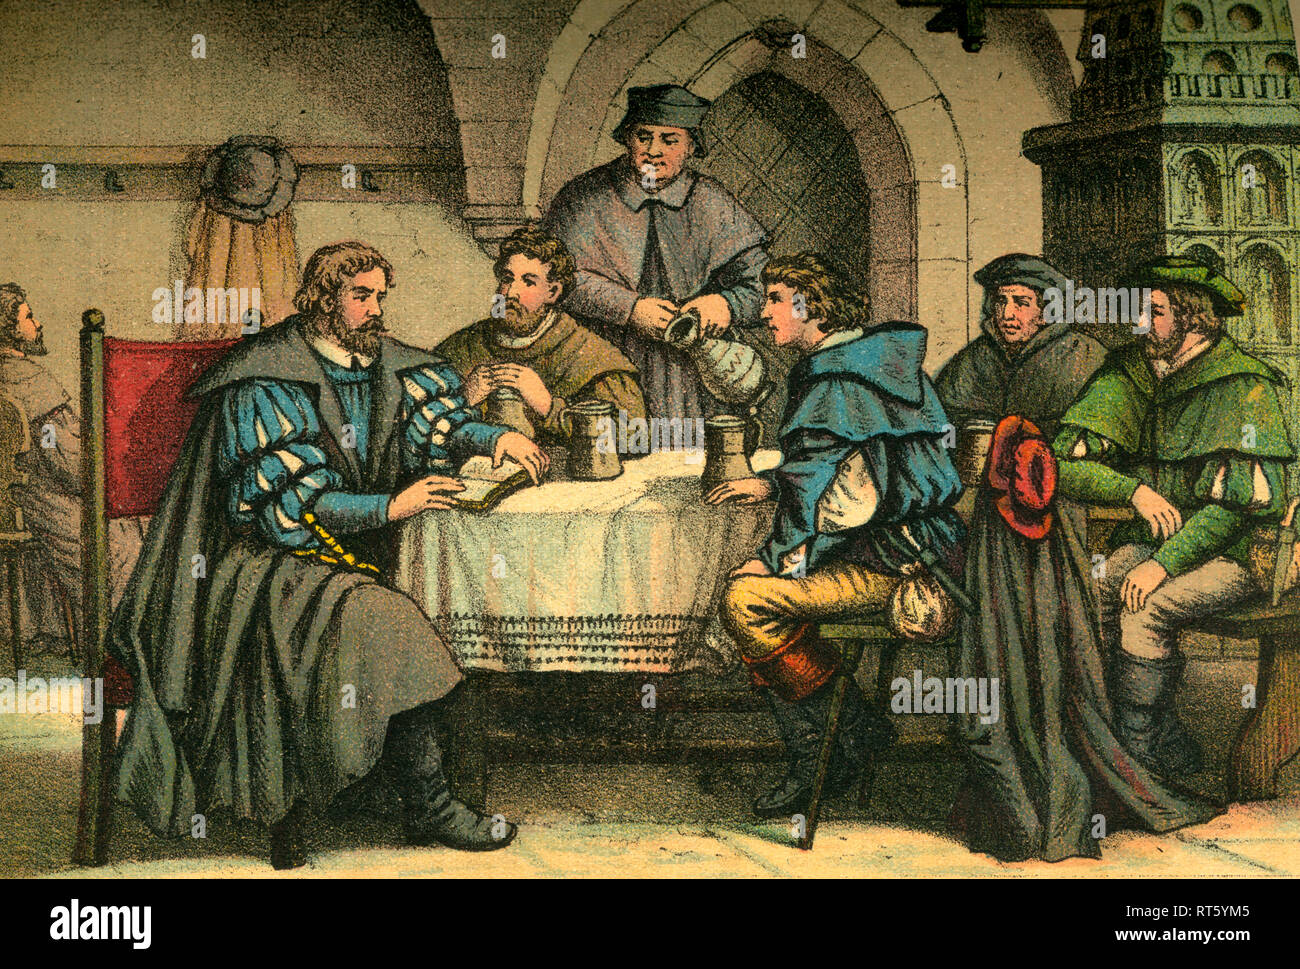 Martin Luther in the restaurant ' zum Schwarzen Bären ' in Jena, coloured image (artist unknown) from: 'Doktor Martin Luthers Leben, Thaten und Mitteilungen... ' (Doctor Martin Luthers life, deeds and opinions...), told by Martin Rade (Paul Martin), published by Hermann Oeser, Neusalza i. S., 1887., Additional-Rights-Clearance-Info-Not-Available Stock Photo